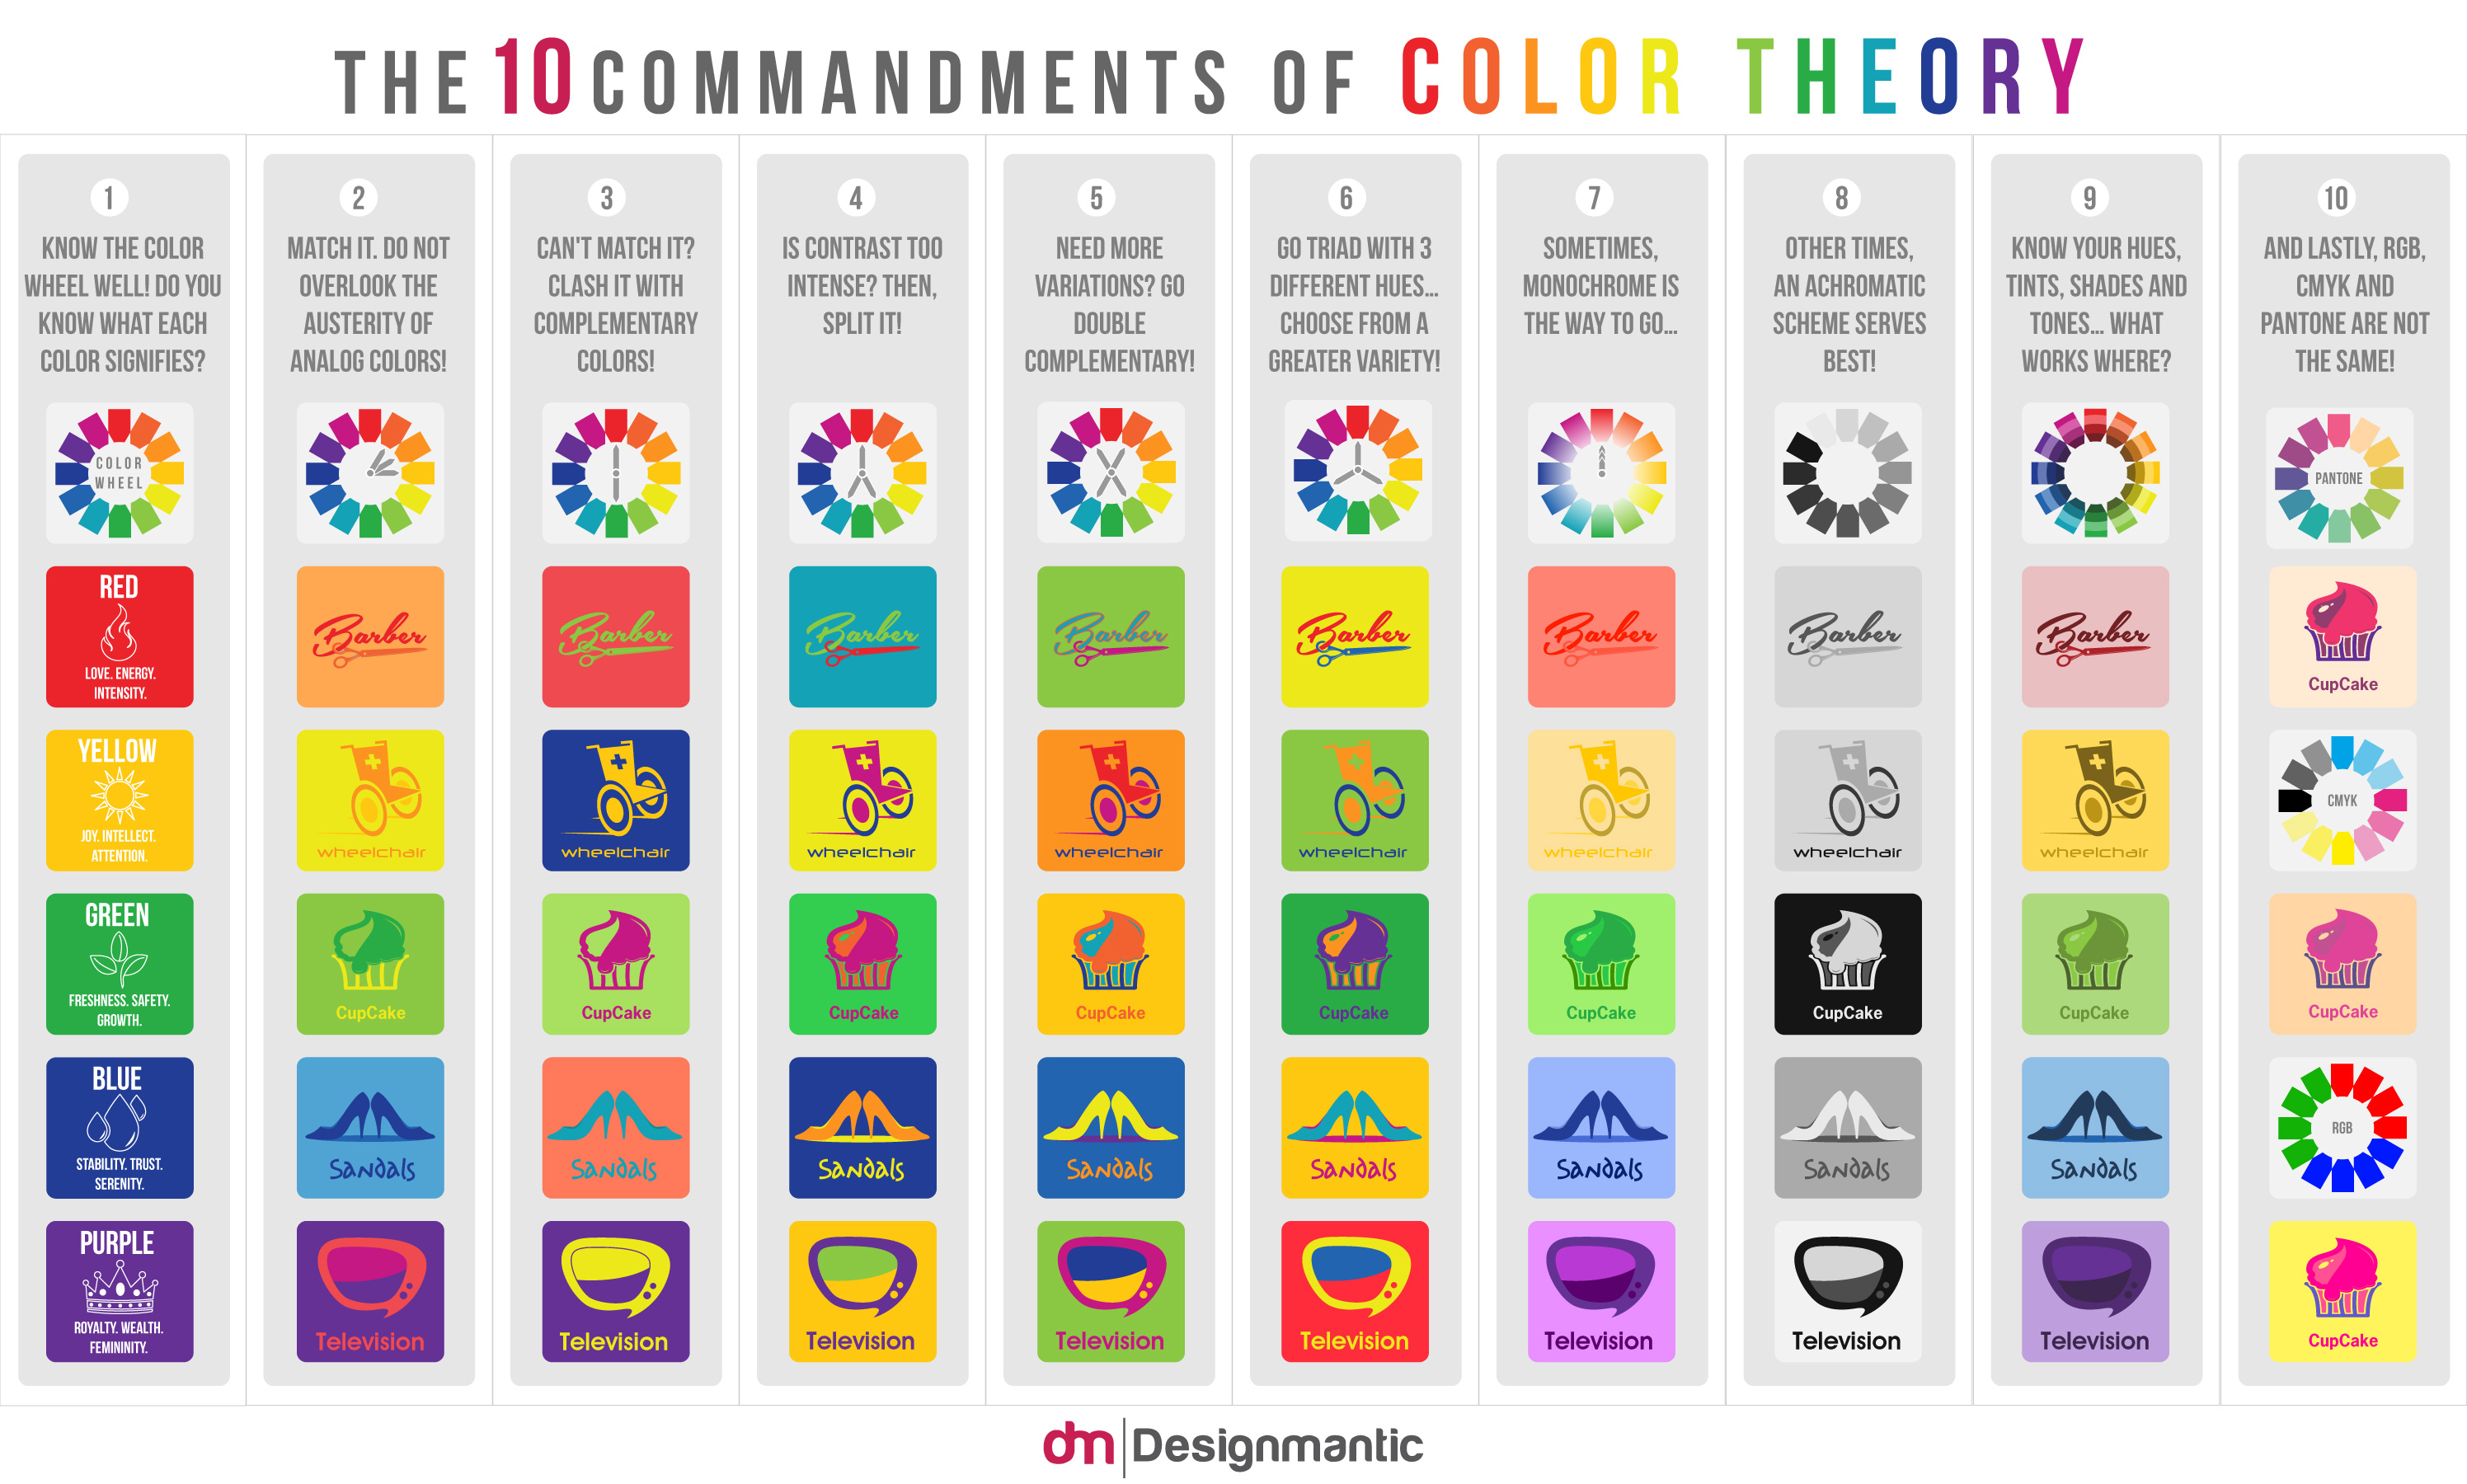 [INFOGRAPHIC]: The 10 Commandments of Color Theory